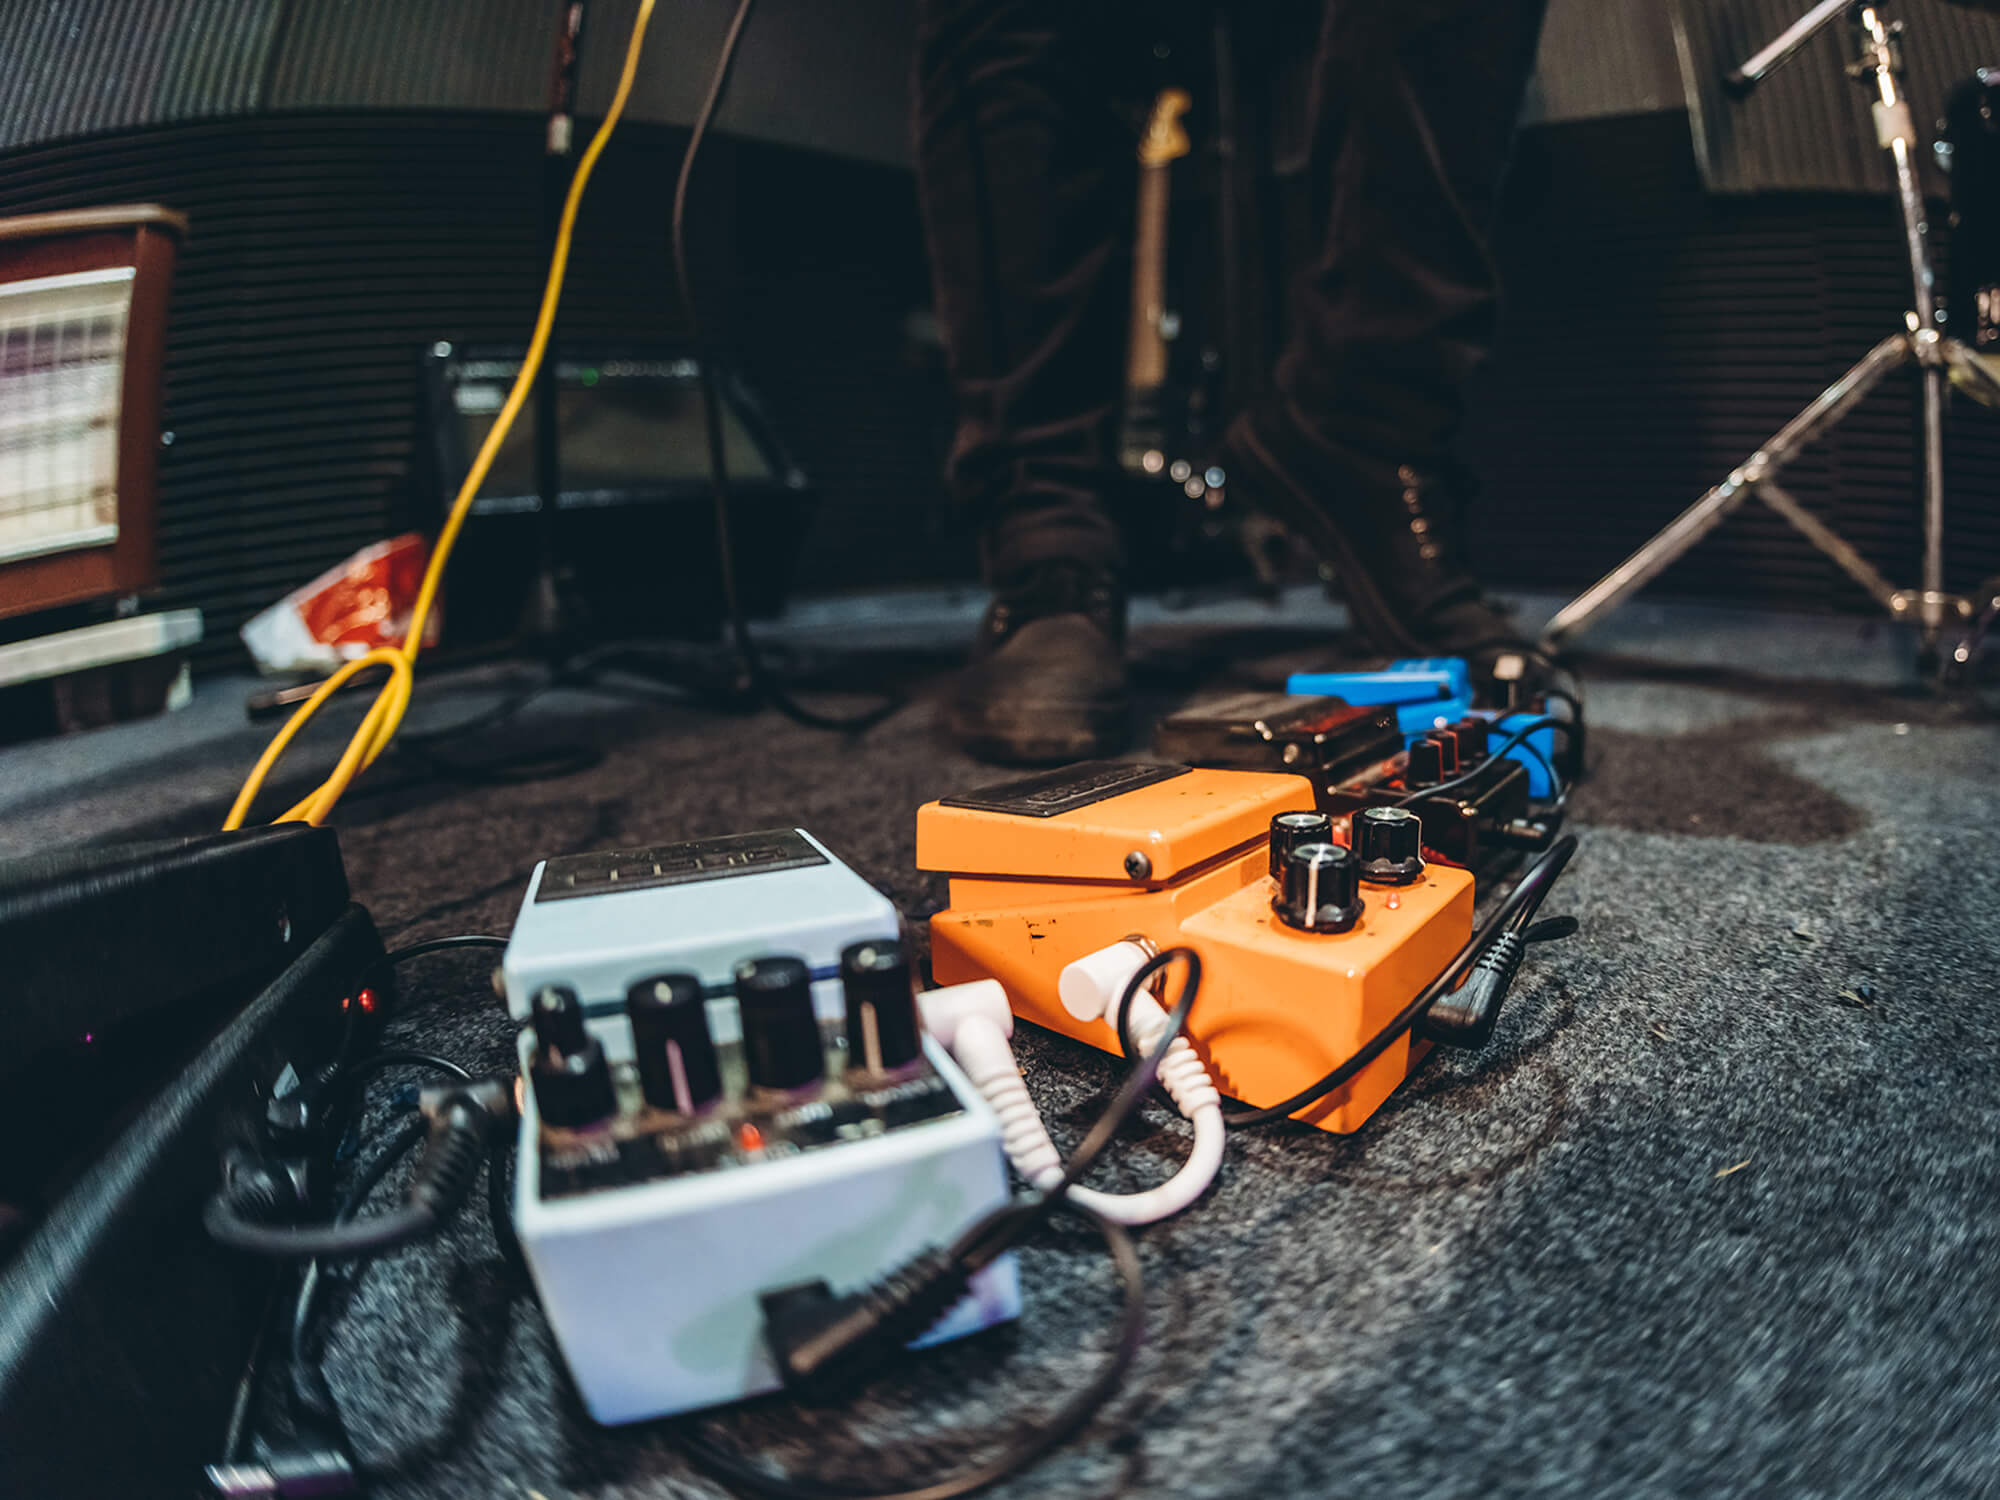 Guitar pedals on the floor in a studio, photo by Urbazon/Getty Images